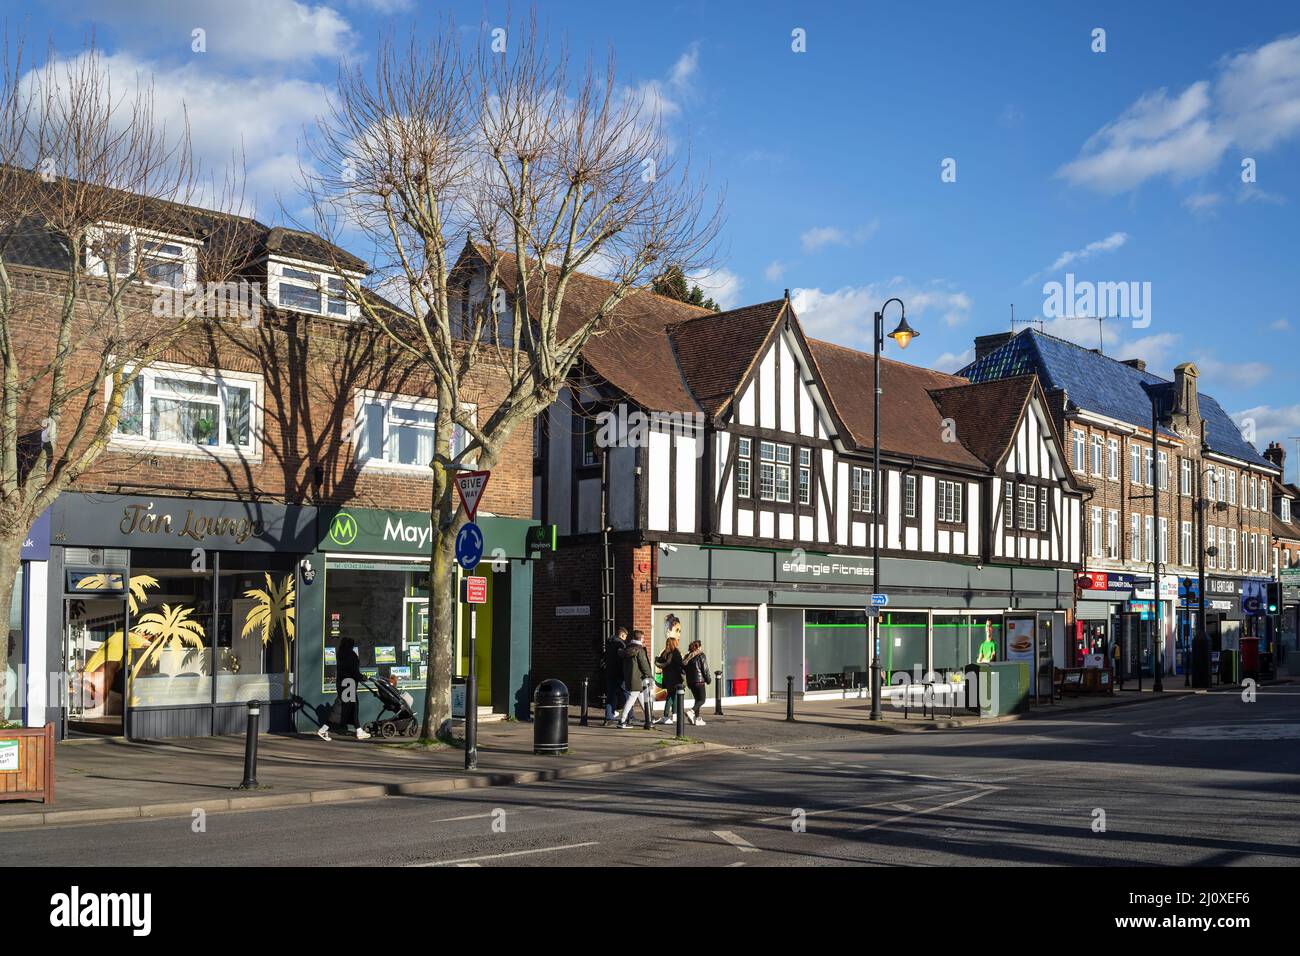 EAST GRINSTEAD, WEST SUSSEX, UK - JANUARY 31: View of shops in East Grinstead on January 31, 2022. Unidentified people Stock Photo